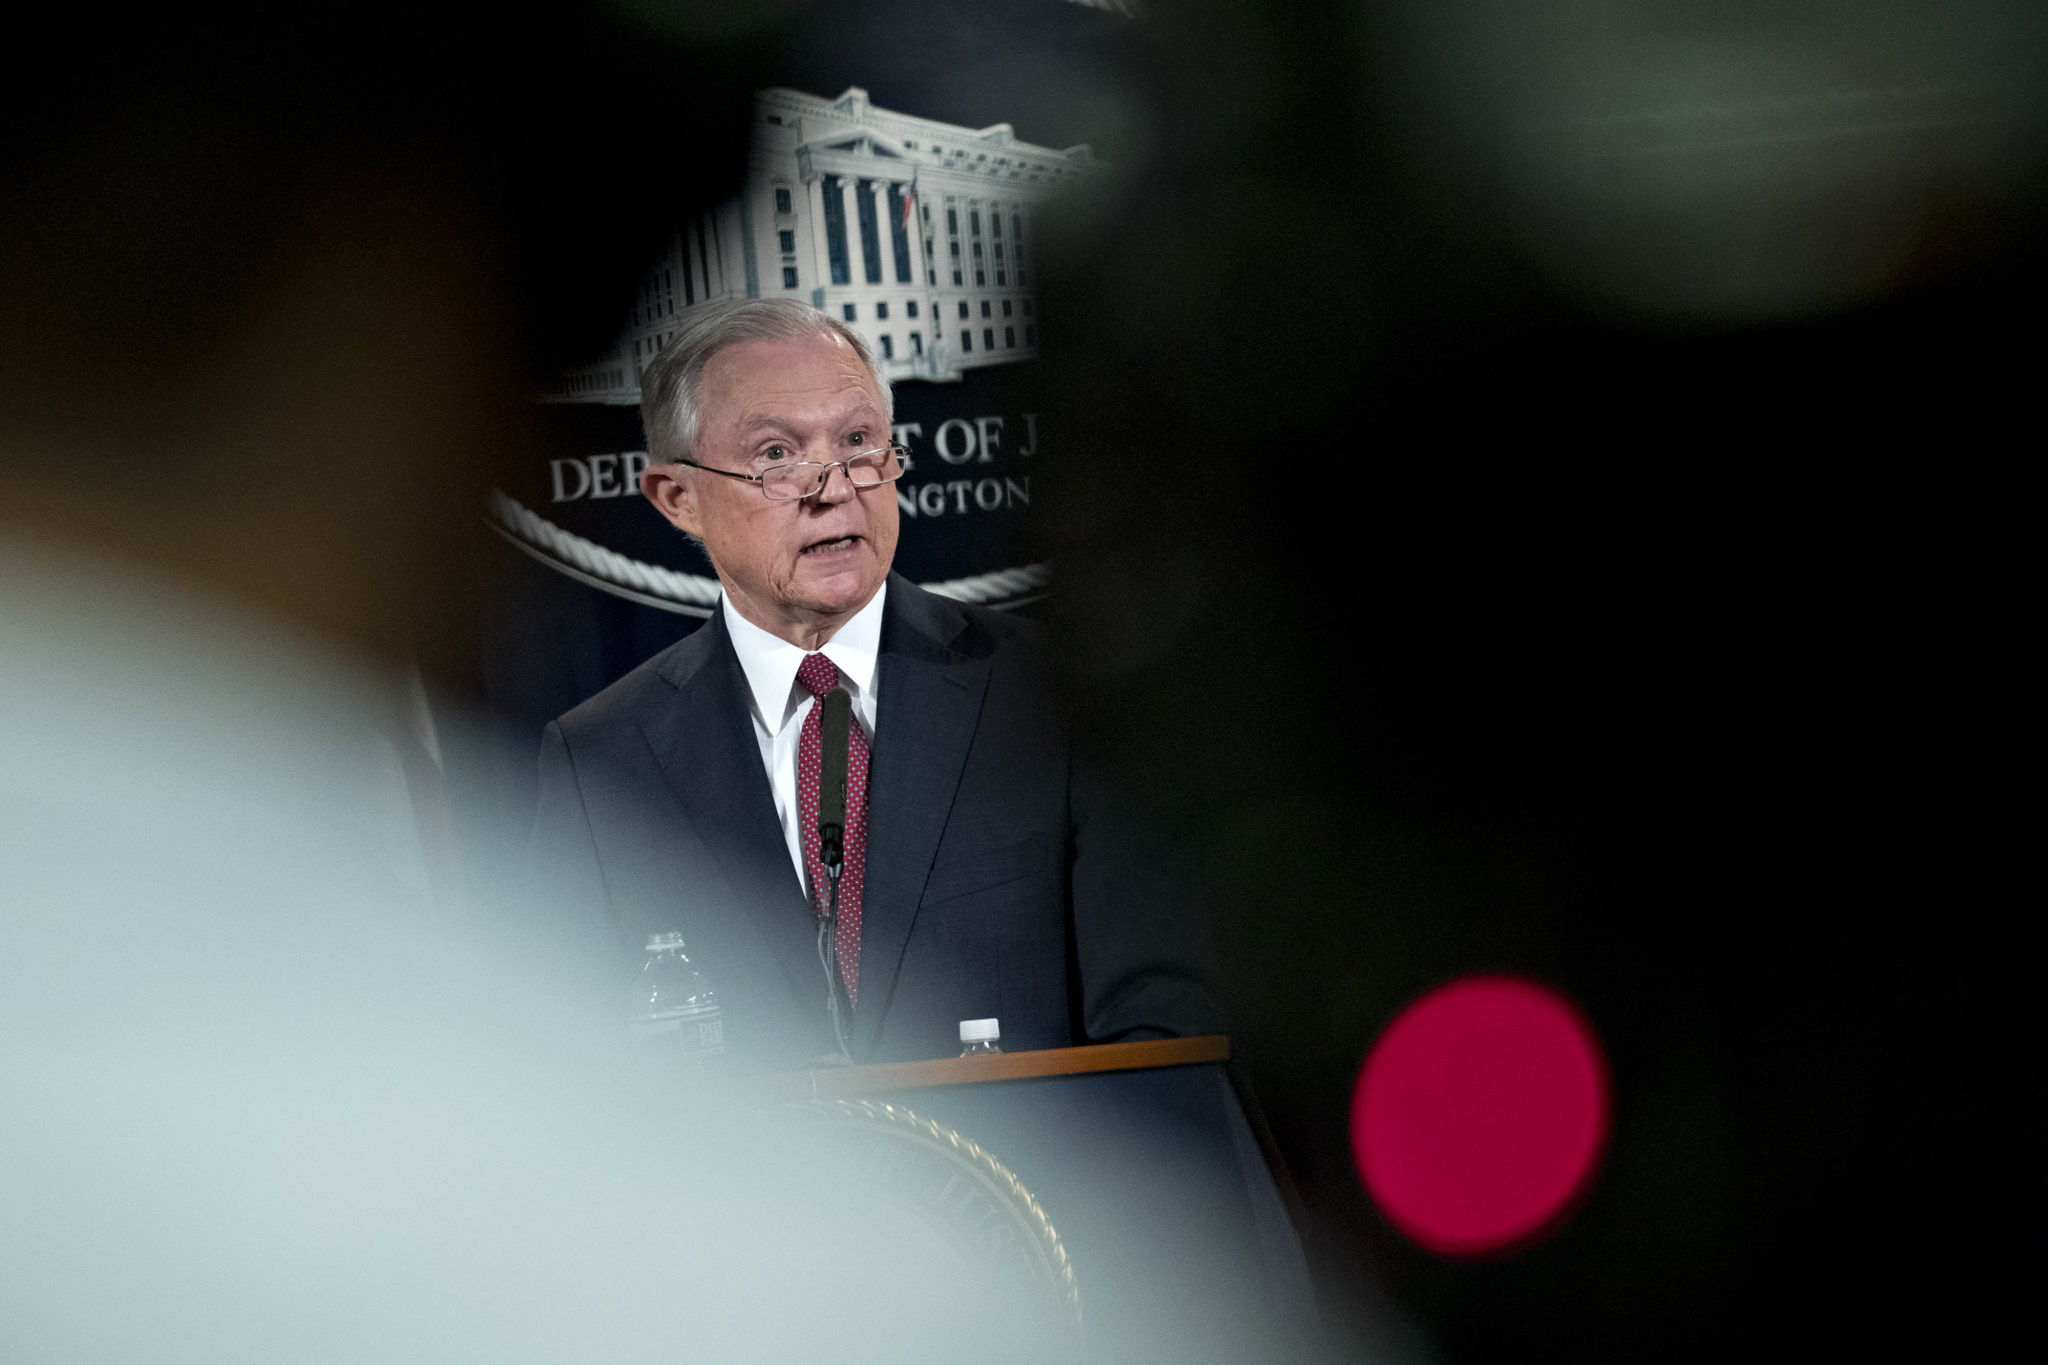 NO DEFERRED ACTION: U.S. Attorney General Jeff Sessions speaks during a briefing at the Justice Department in Washington, D.C., on Sept. 5, announcing the Trump administration's decision to end the Deferred Action for Childhood Arrivals program initiated under President Barack Obama. / BLOOMBERG NEWS PHOTO/ANDREW HARRER